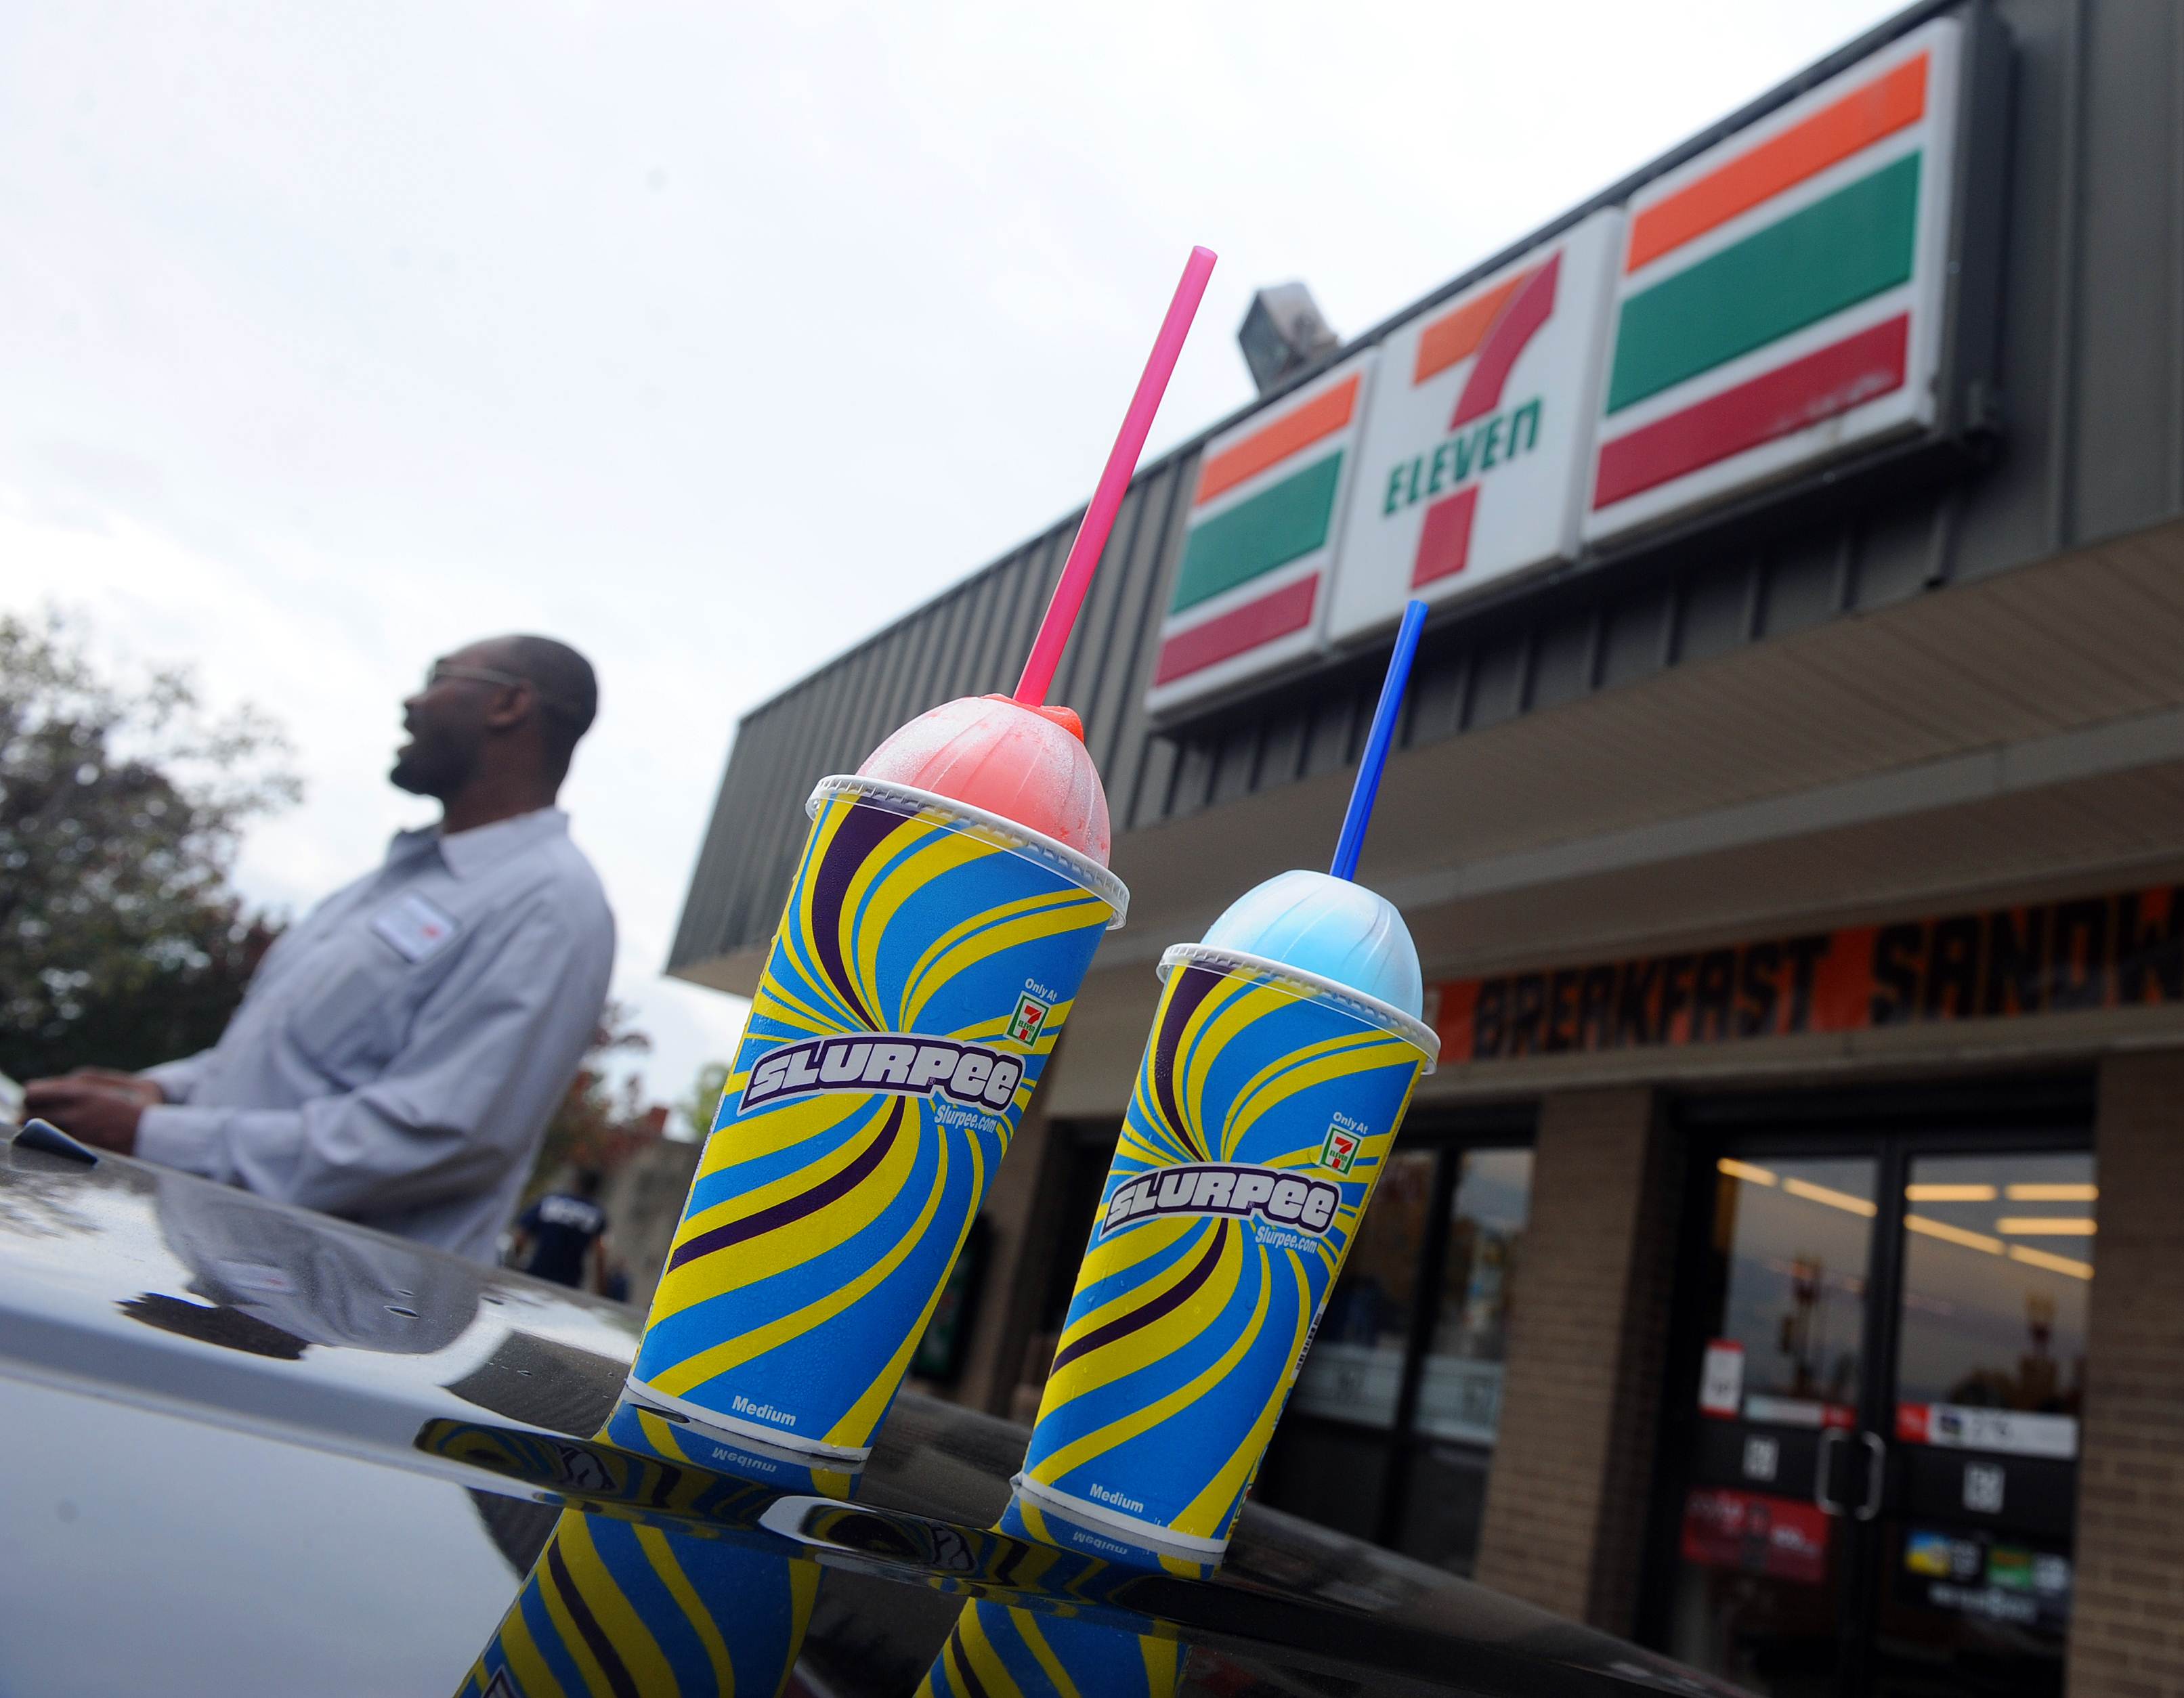 Enjoy a free Slurpee from 7-Eleven on Tuesday